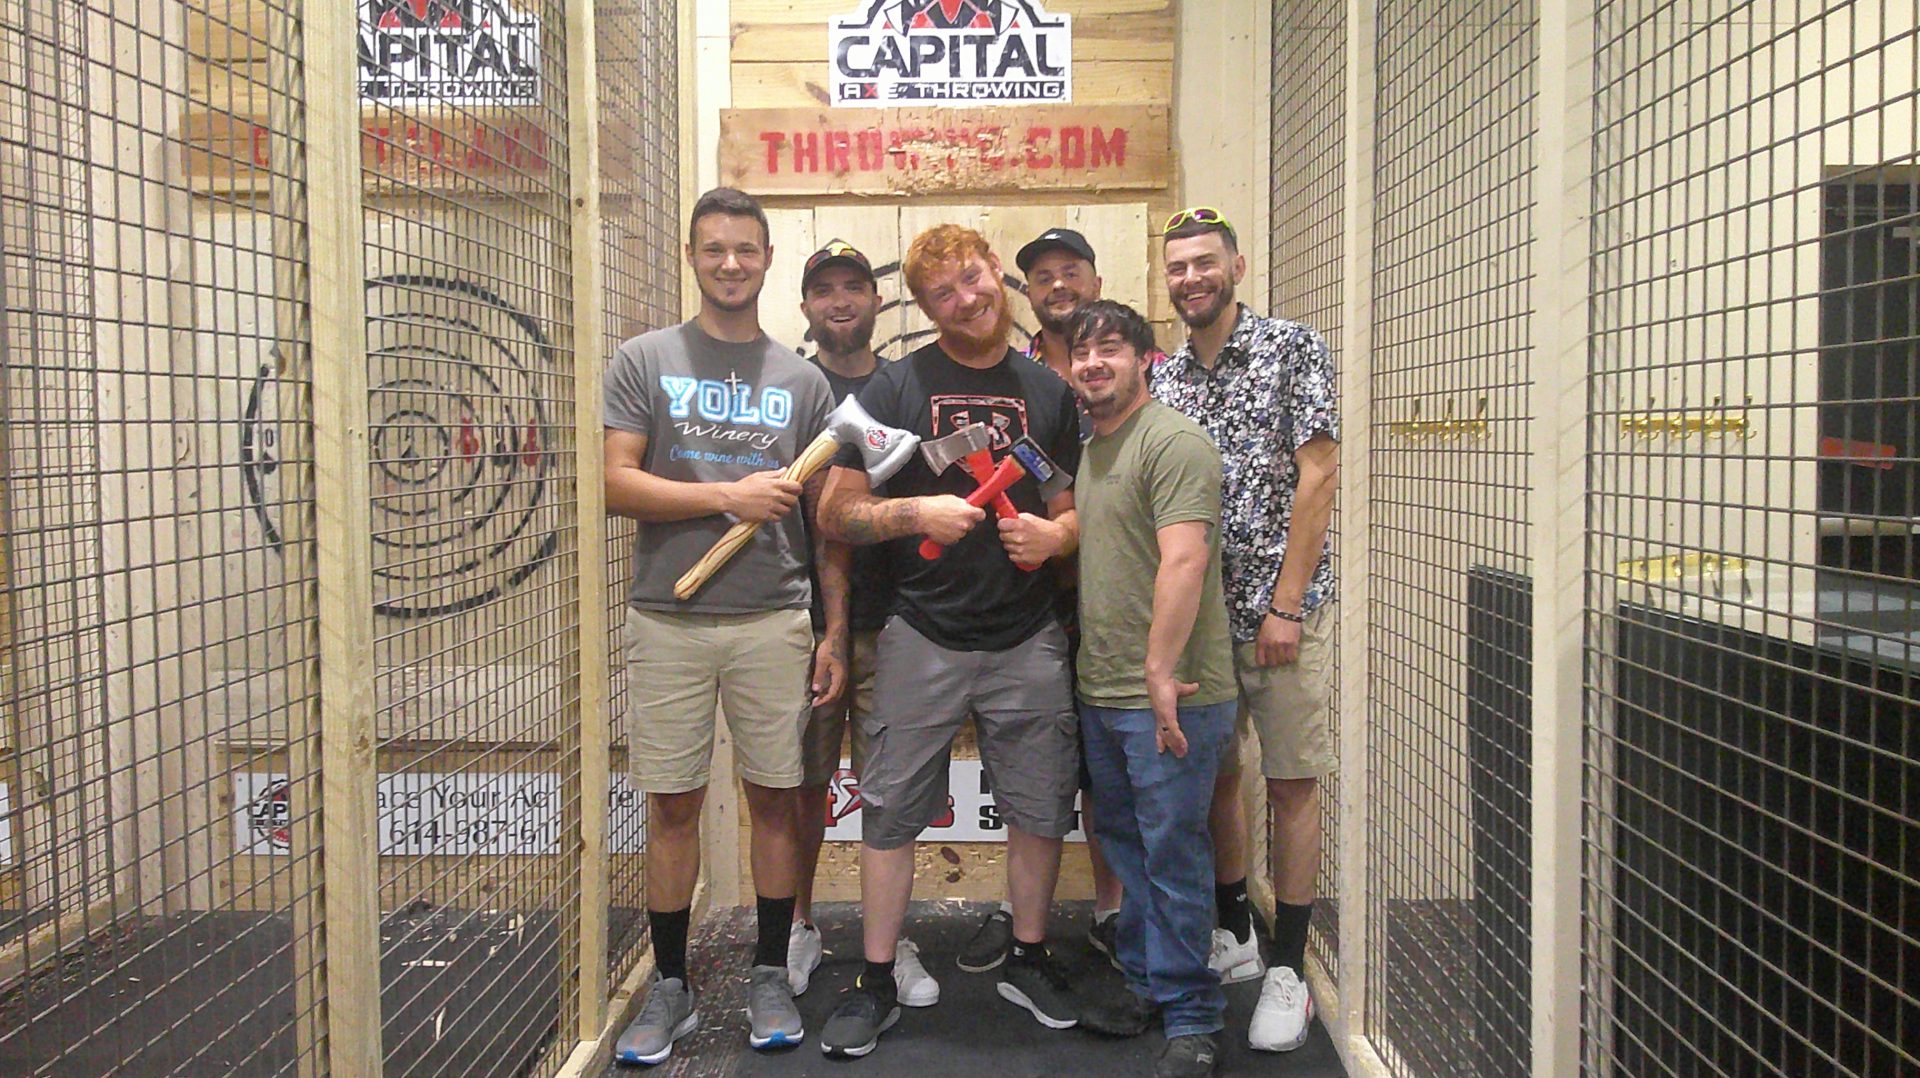 Photo of bachelor party group at Capital axe throwing